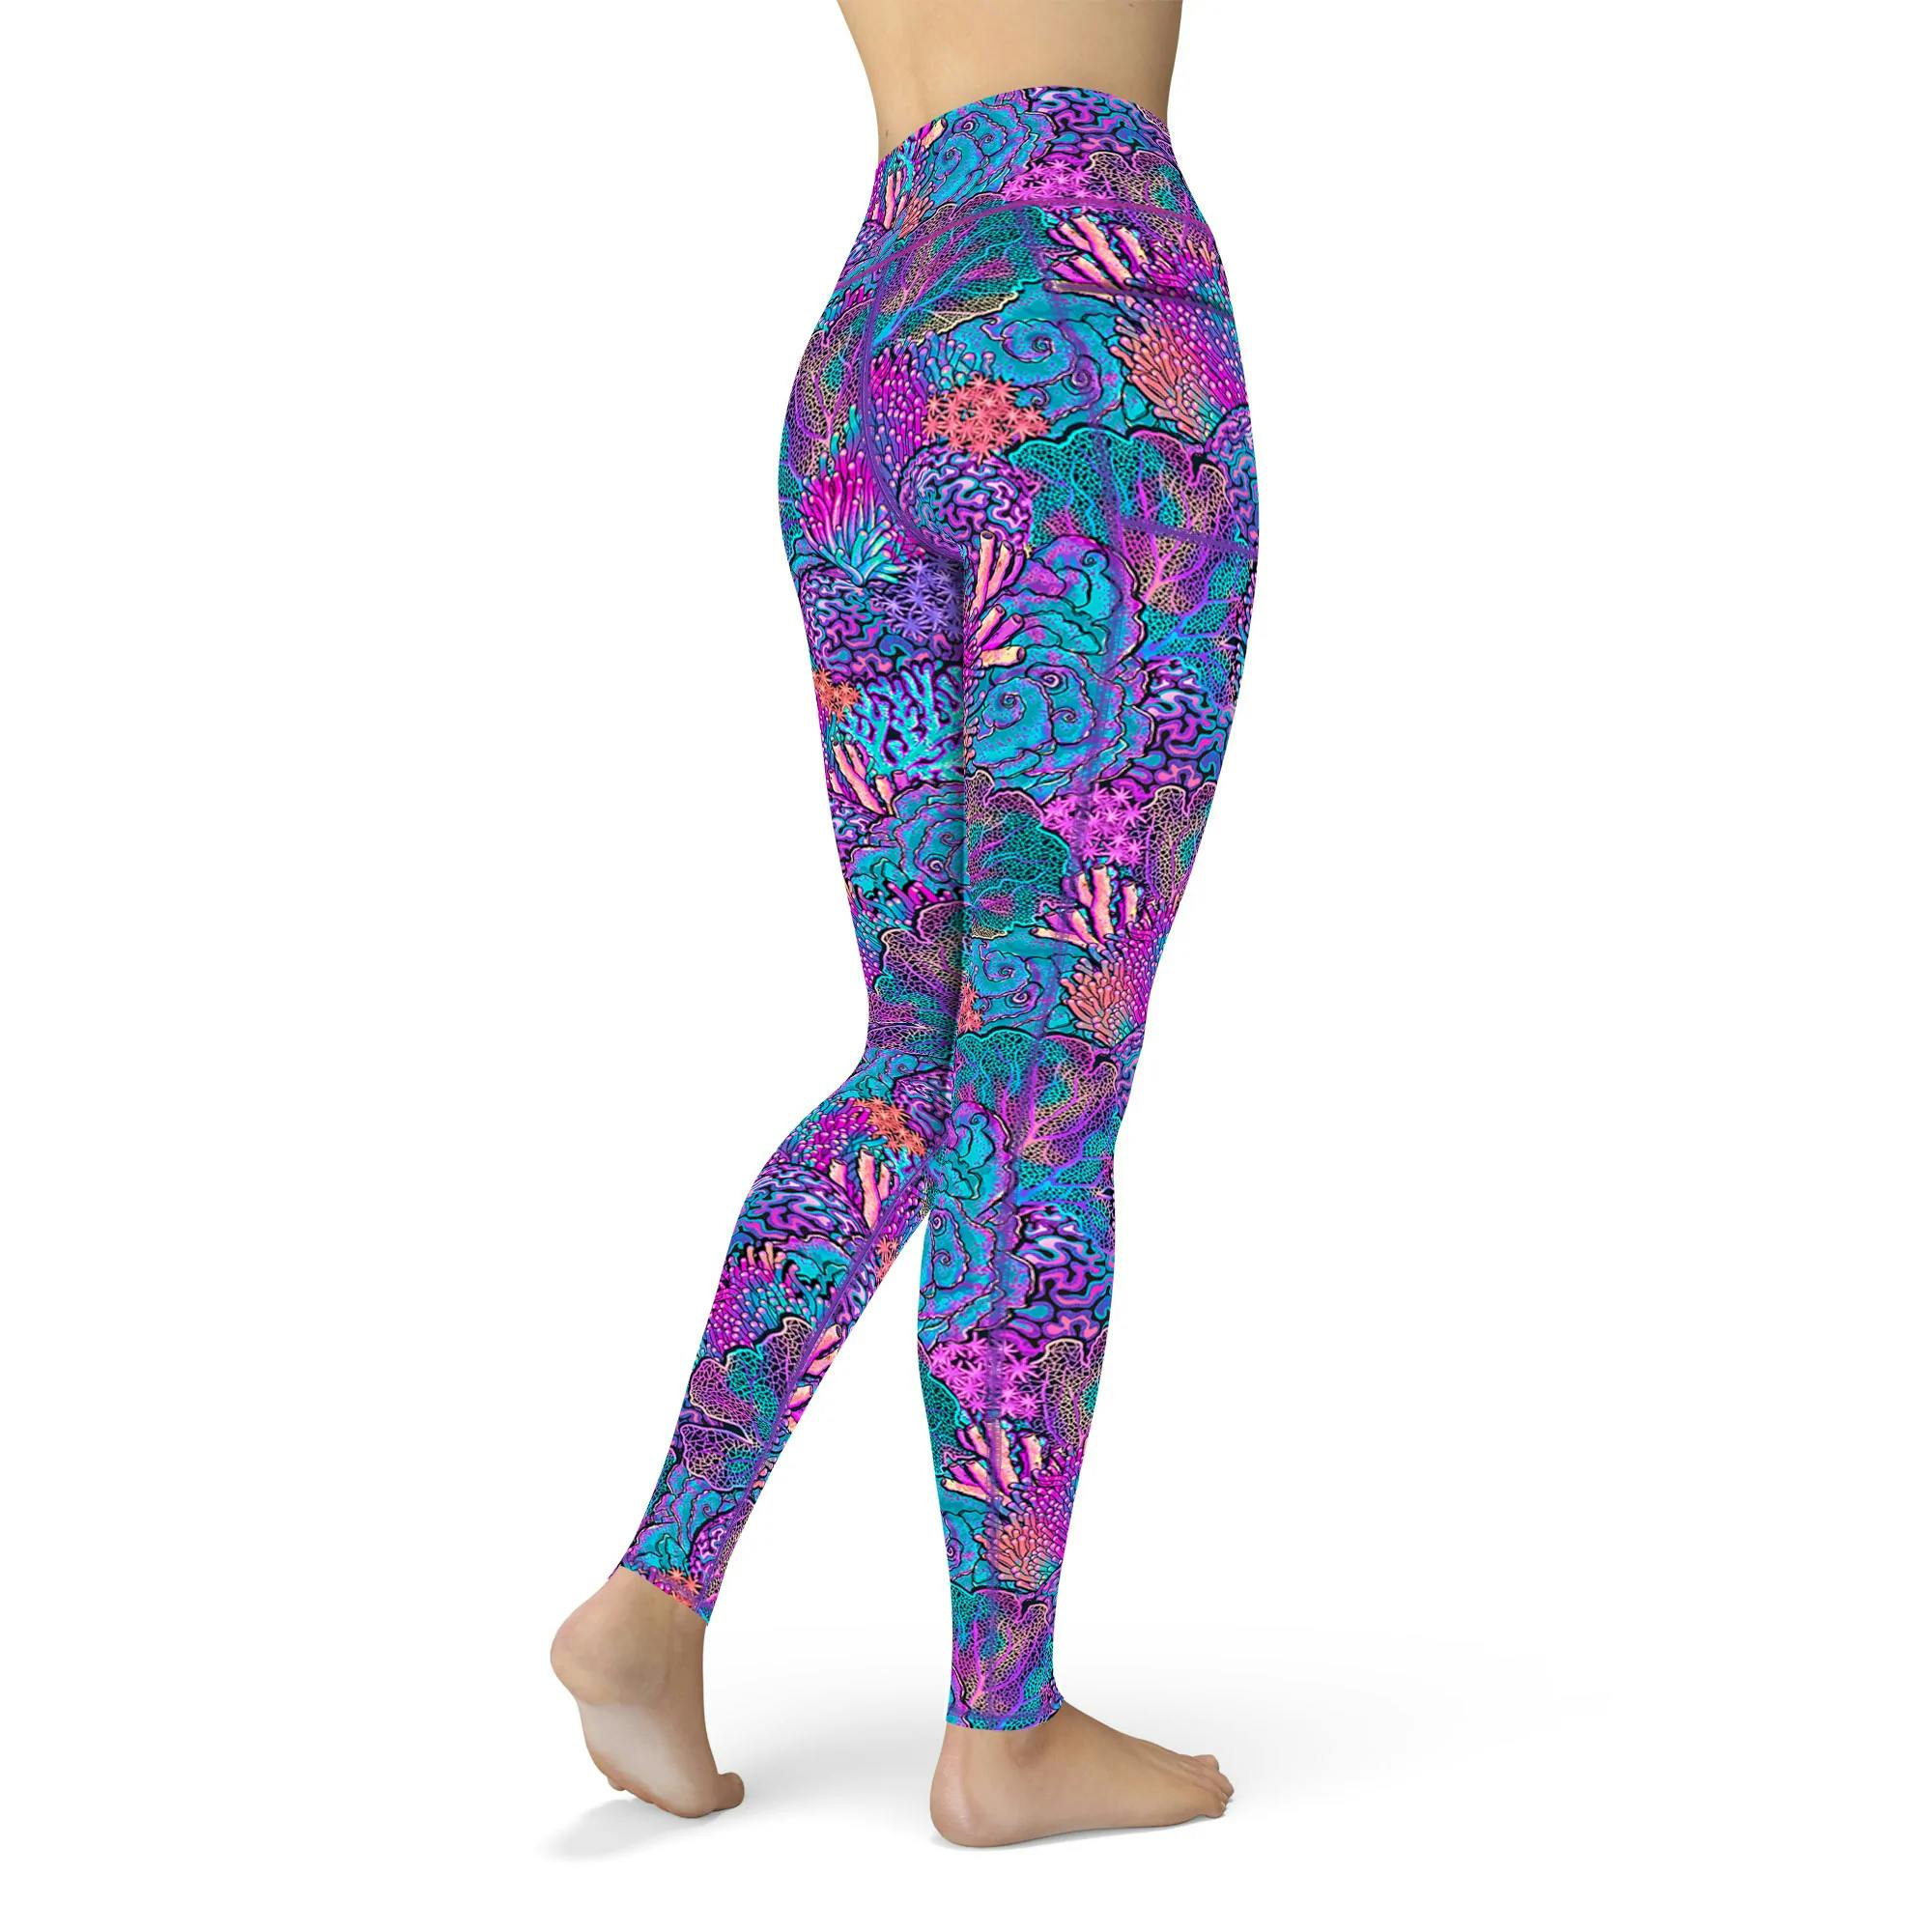 Spacefish Army Recycled Leggings (Women’s) - Coral Kaleidoscope